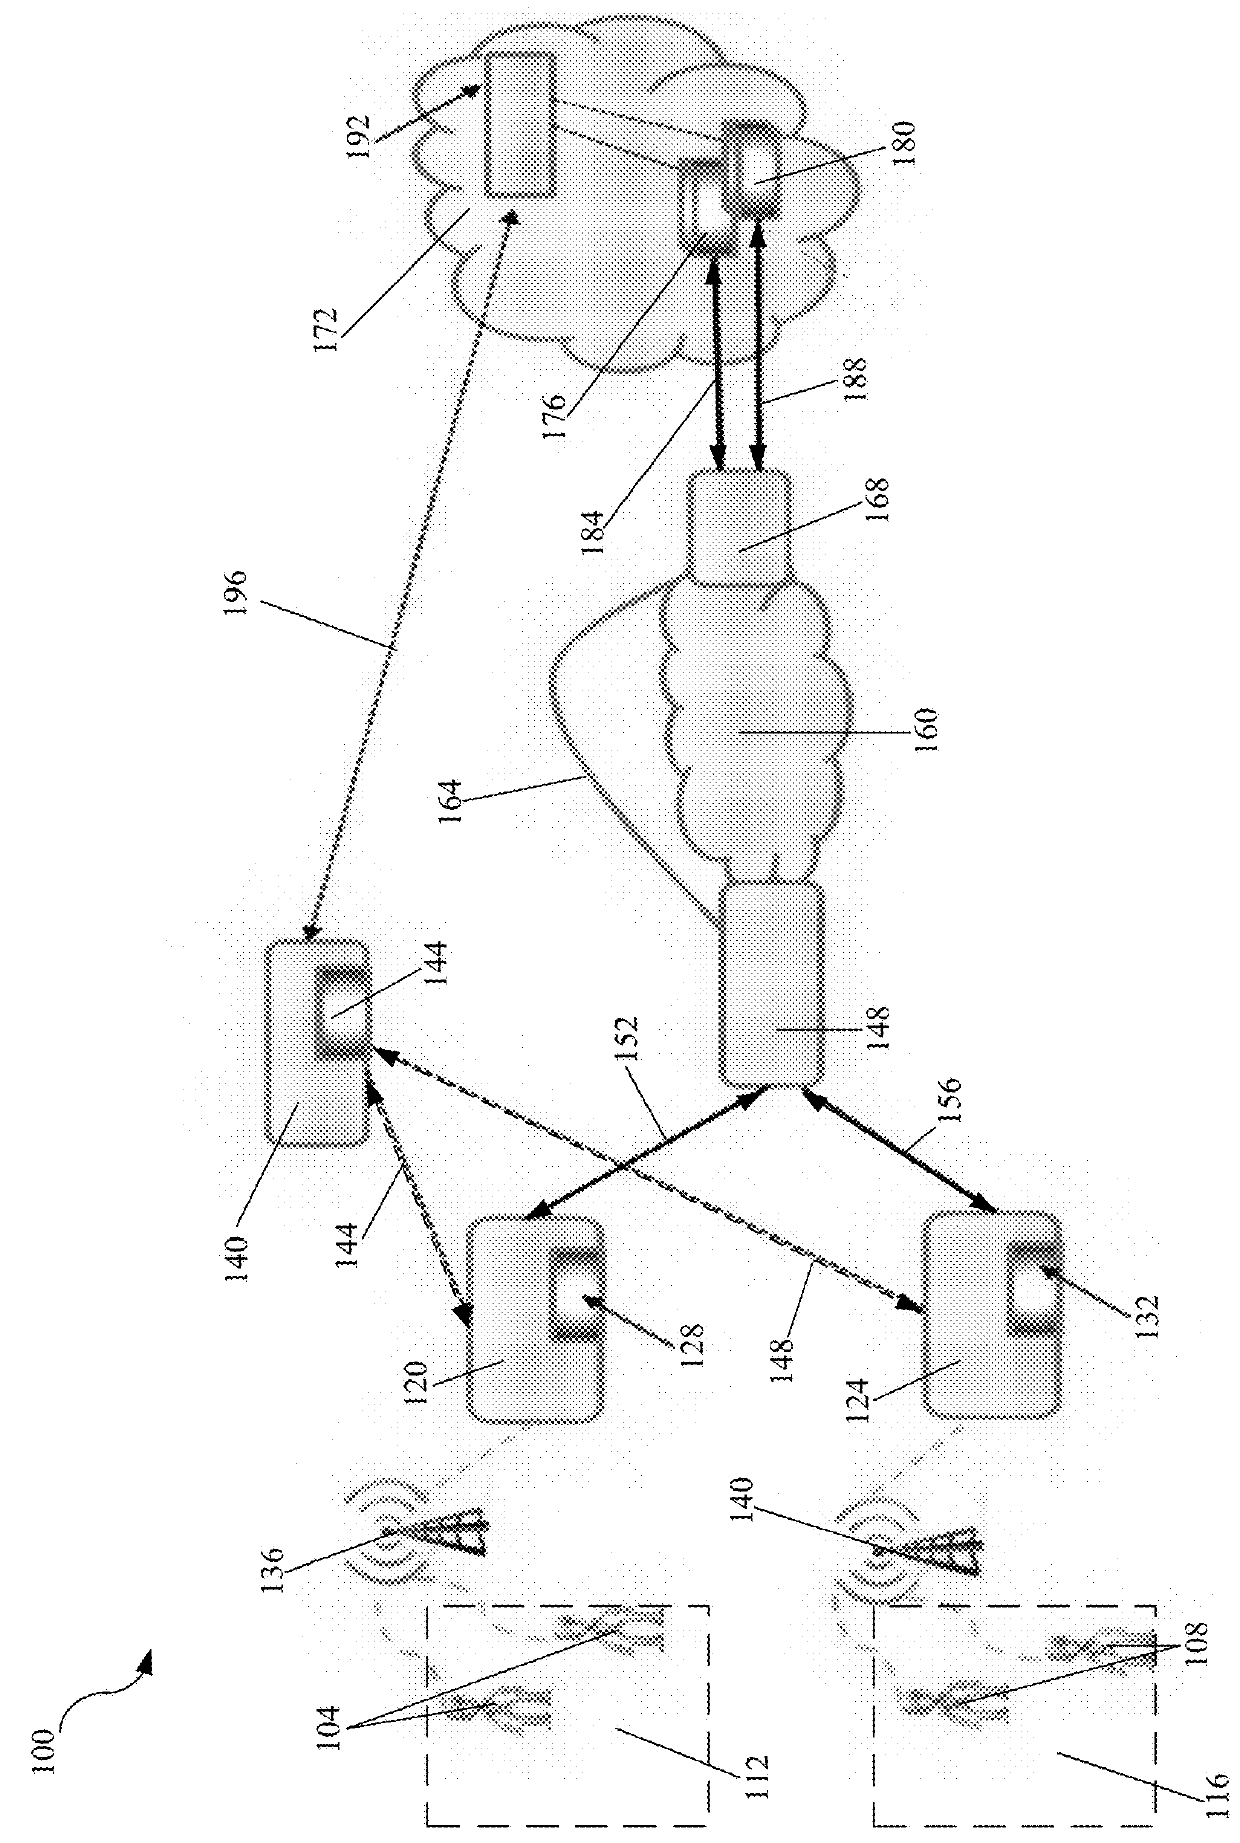 Method and program product for robot communications